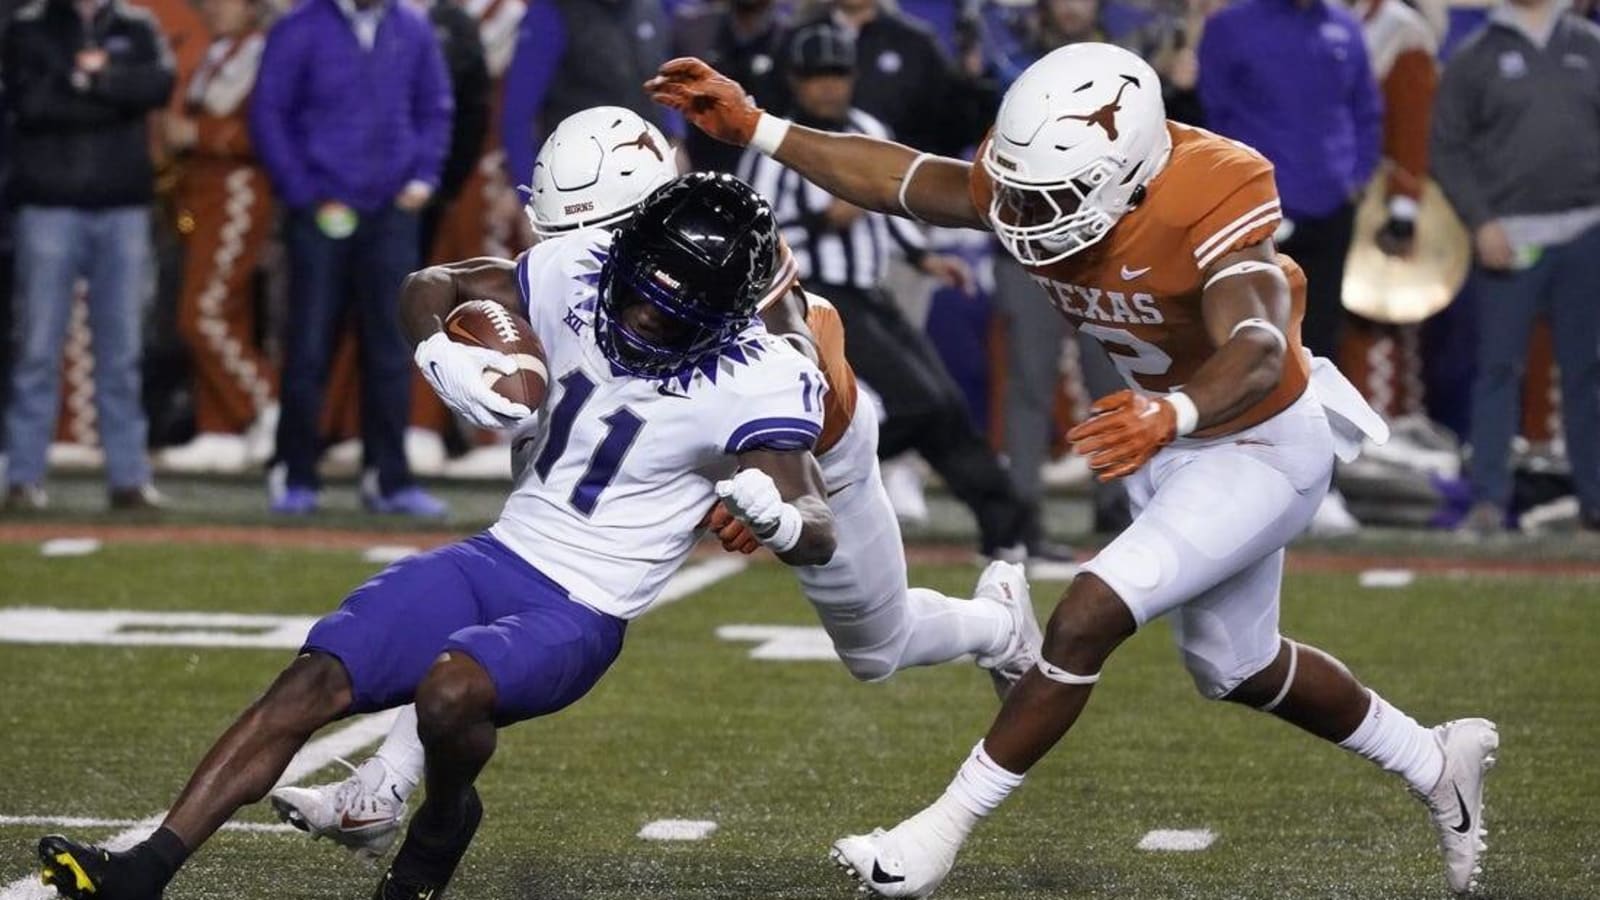 Defense leads No. 4 TCU to gritty win over No. 18 Texas